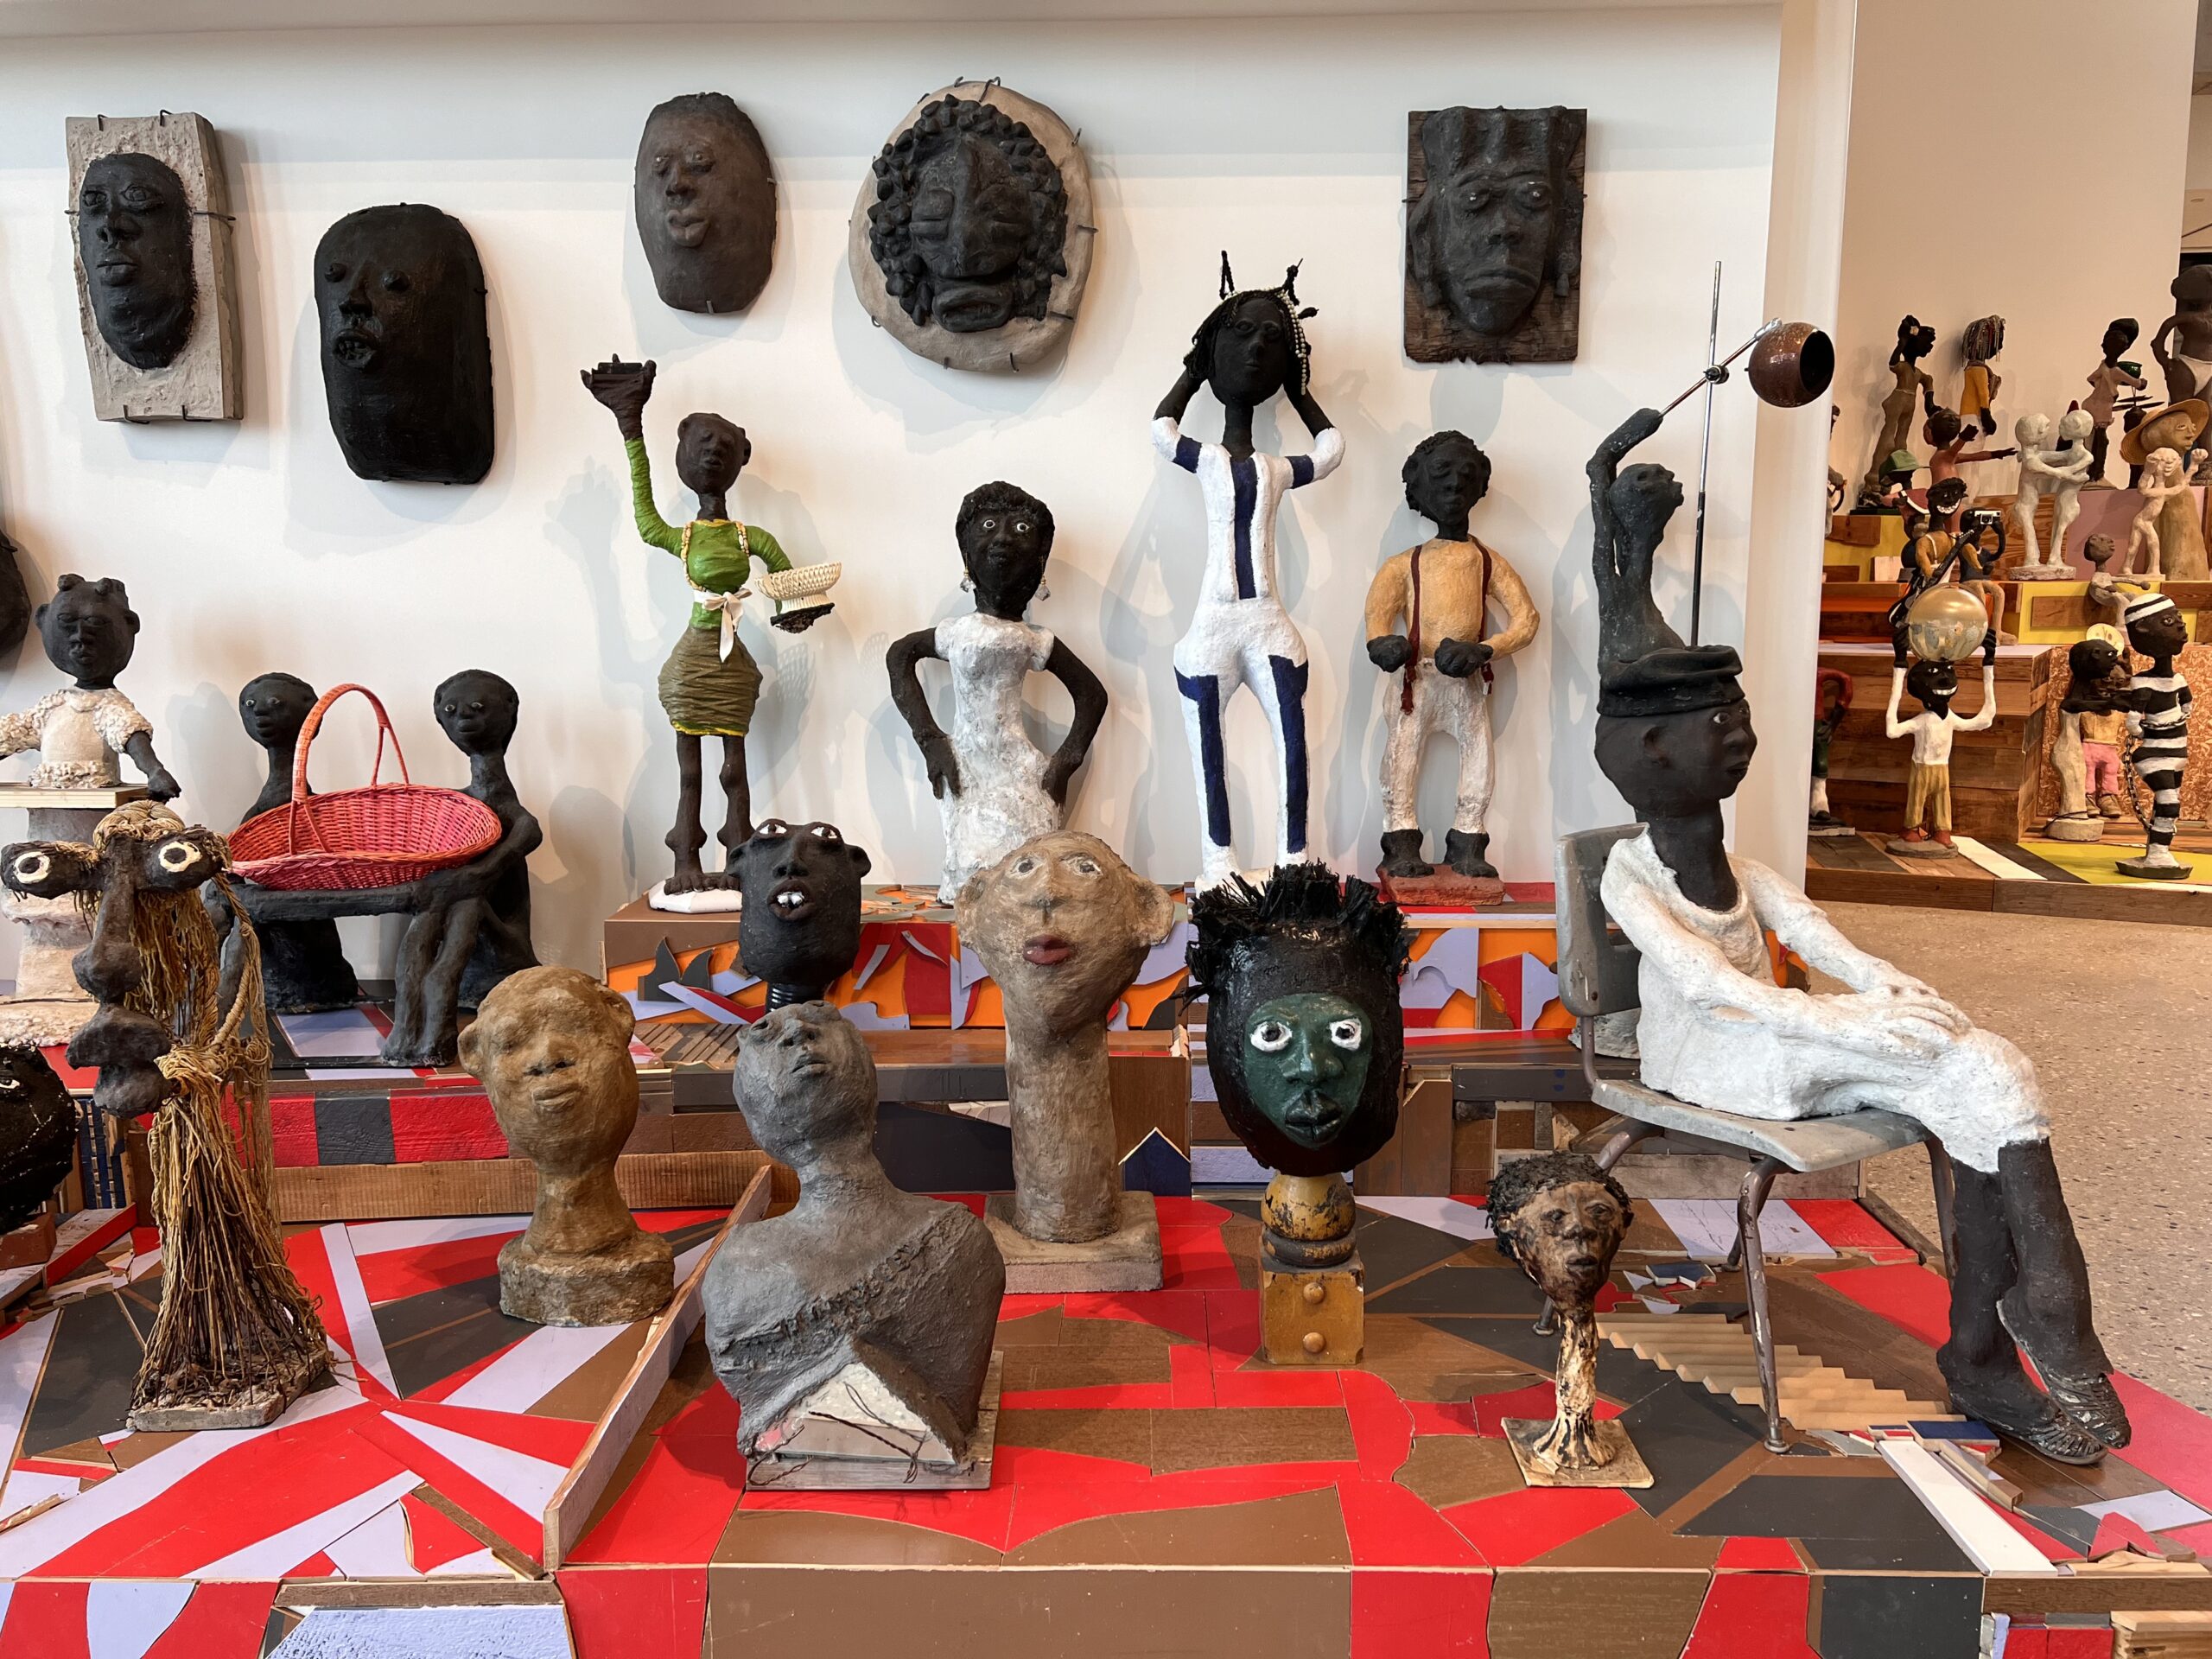 A collection of sculptural works depicting figures with dark skin tone. Some are mounted on the wall and others are displayed on a table-like surface with a patterned covering.